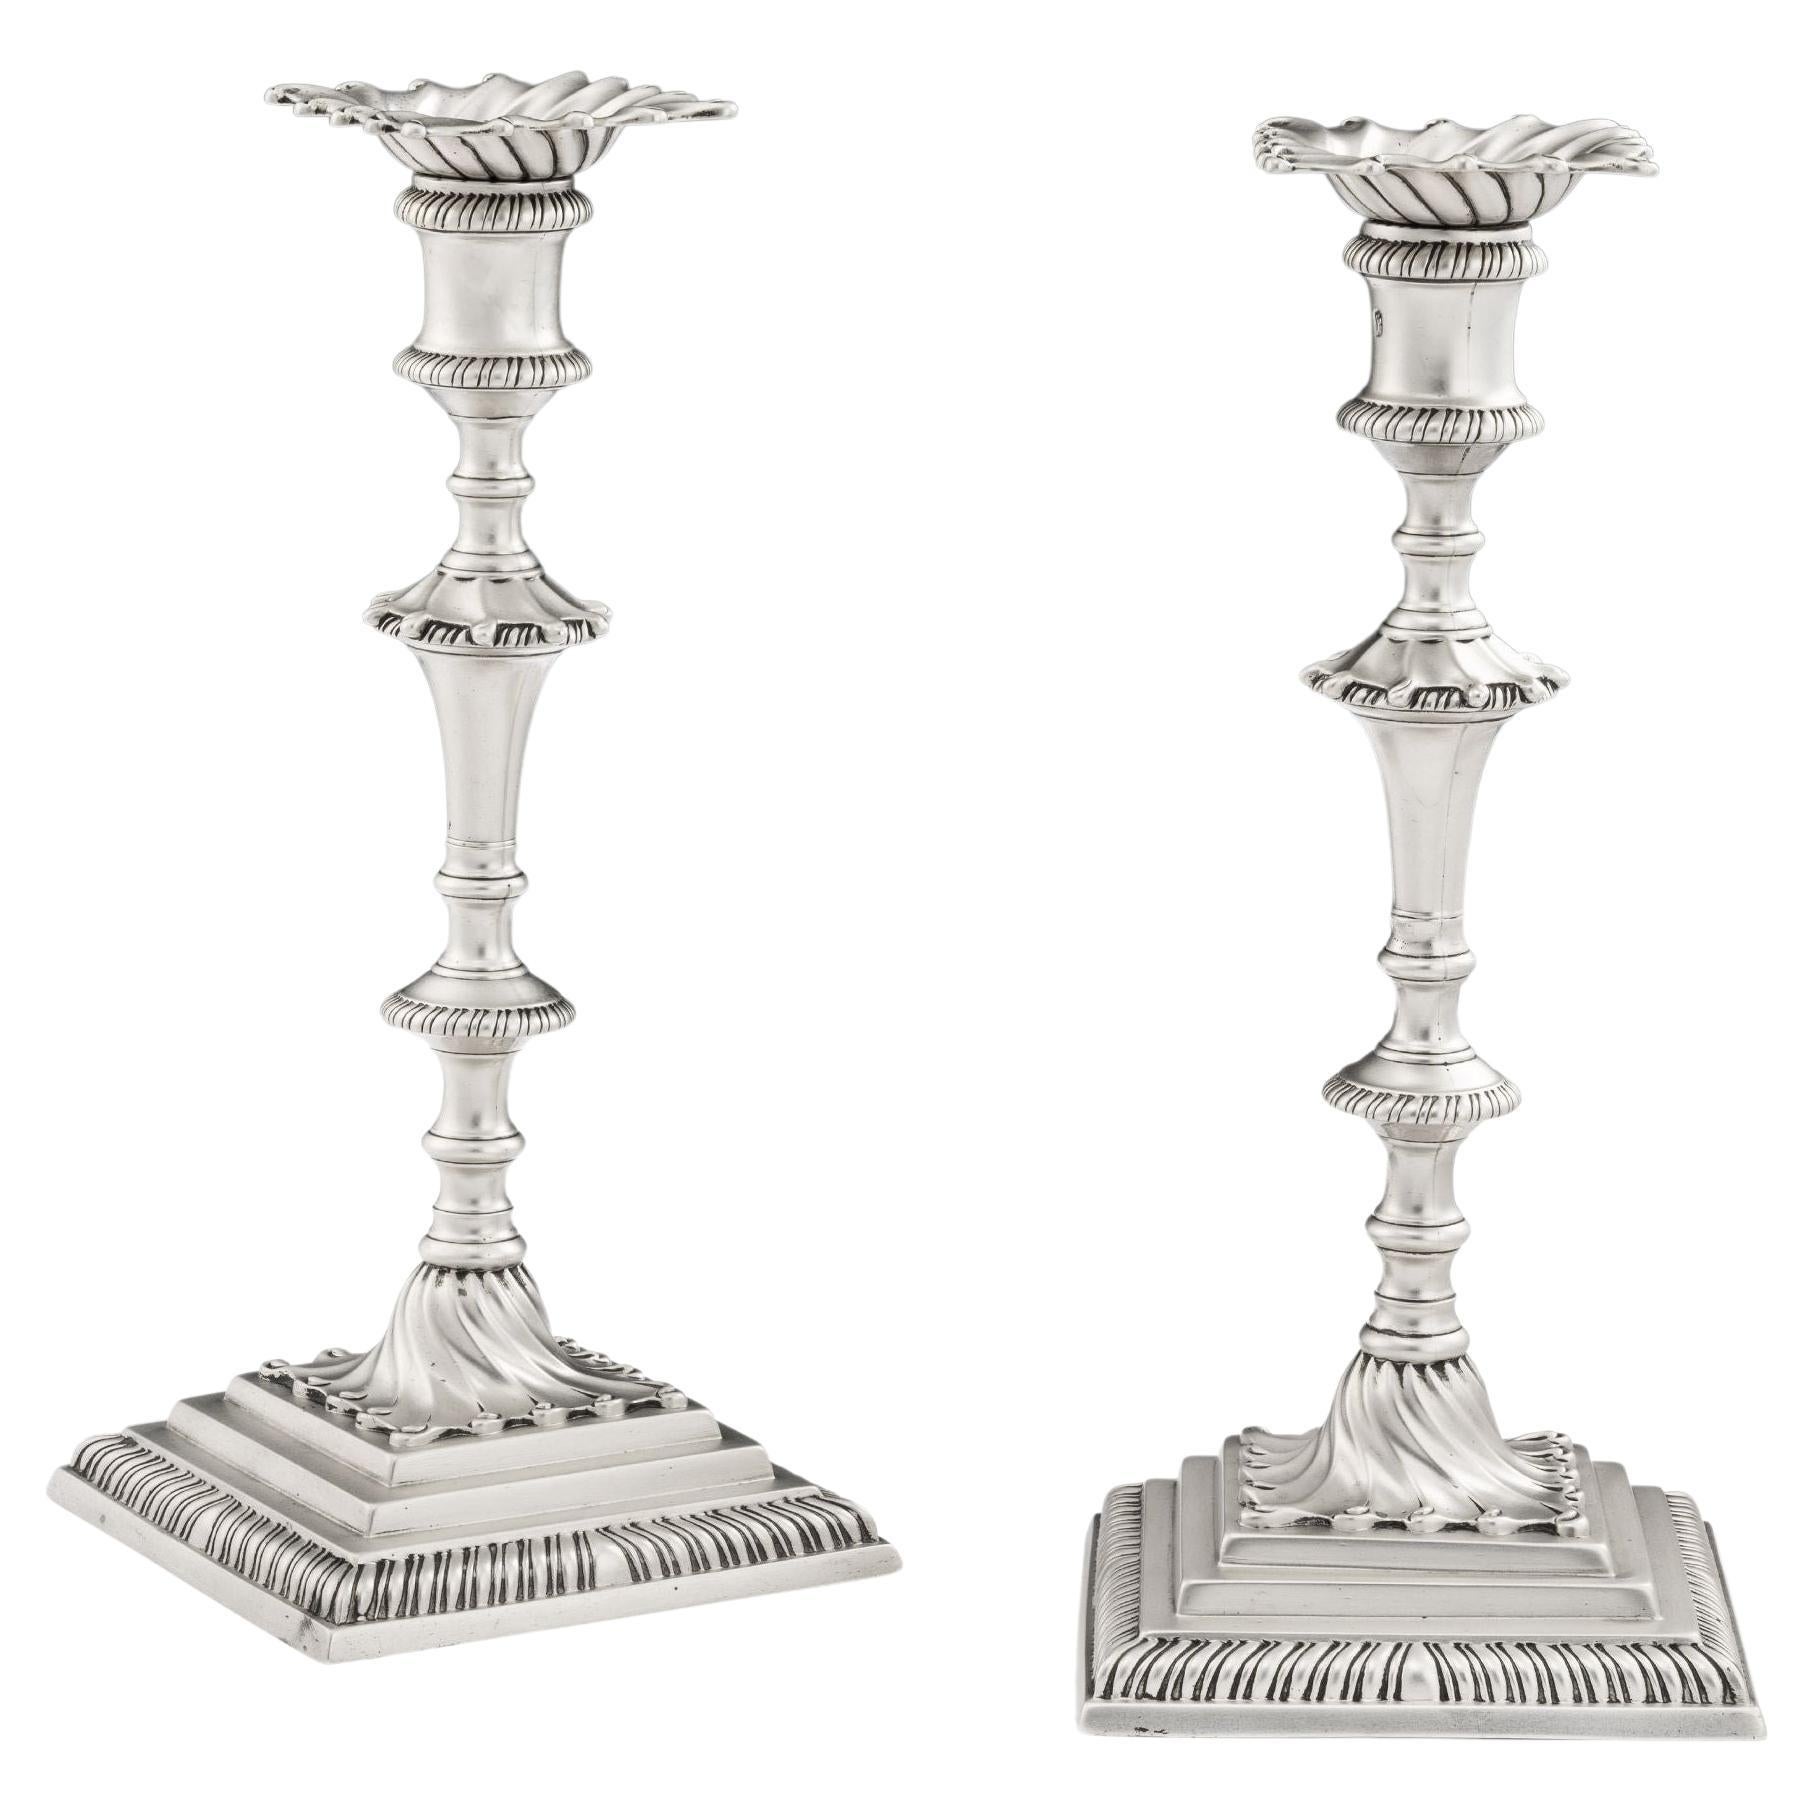 Pair of George III Cast Candlesticks Made in London in 1771 by Ebenezer Coker For Sale